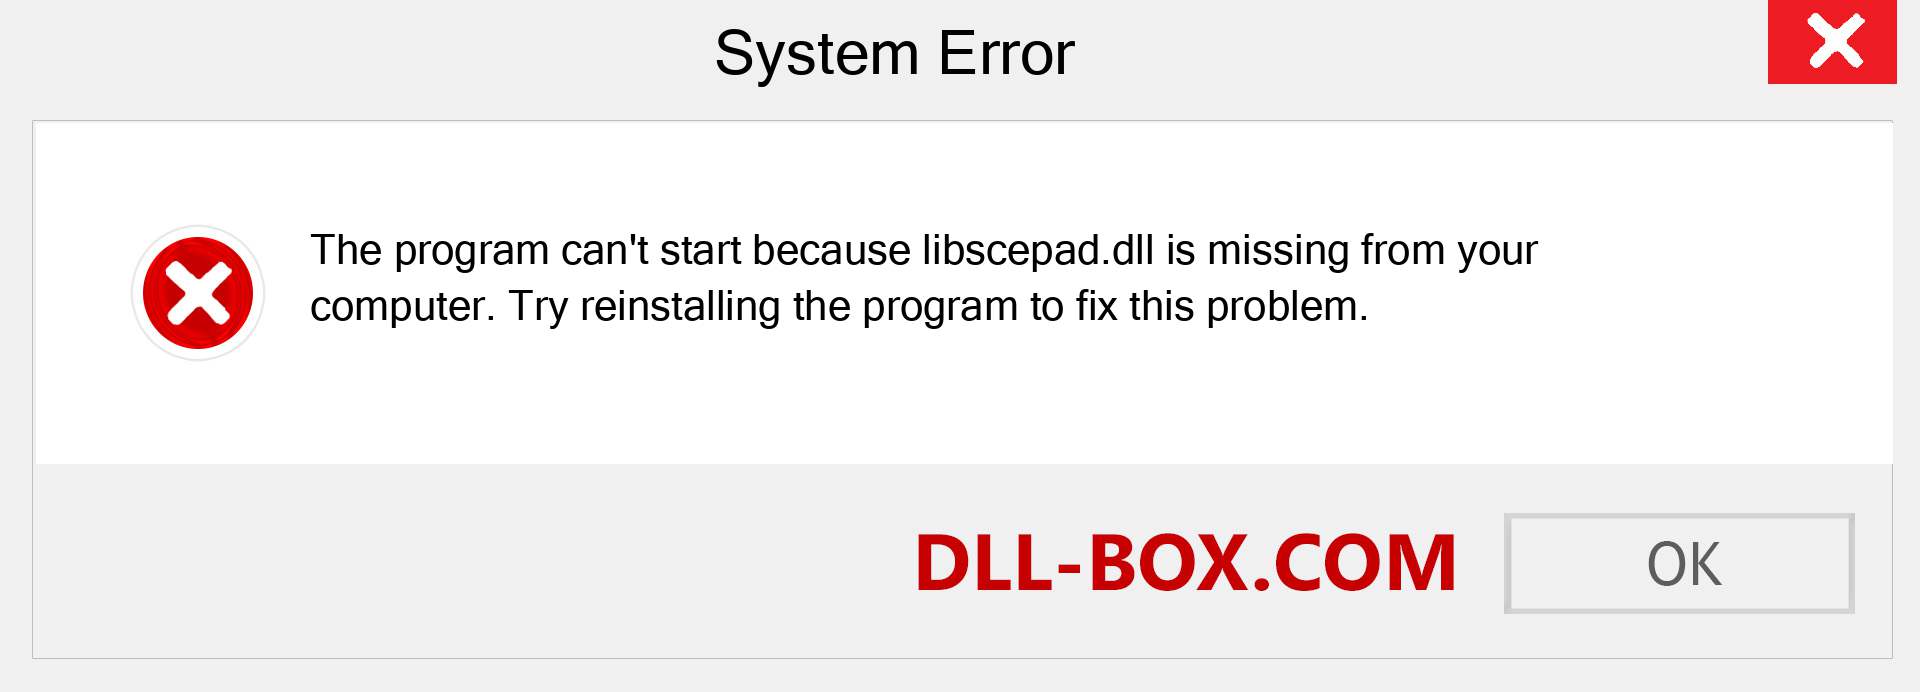  libscepad.dll file is missing?. Download for Windows 7, 8, 10 - Fix  libscepad dll Missing Error on Windows, photos, images